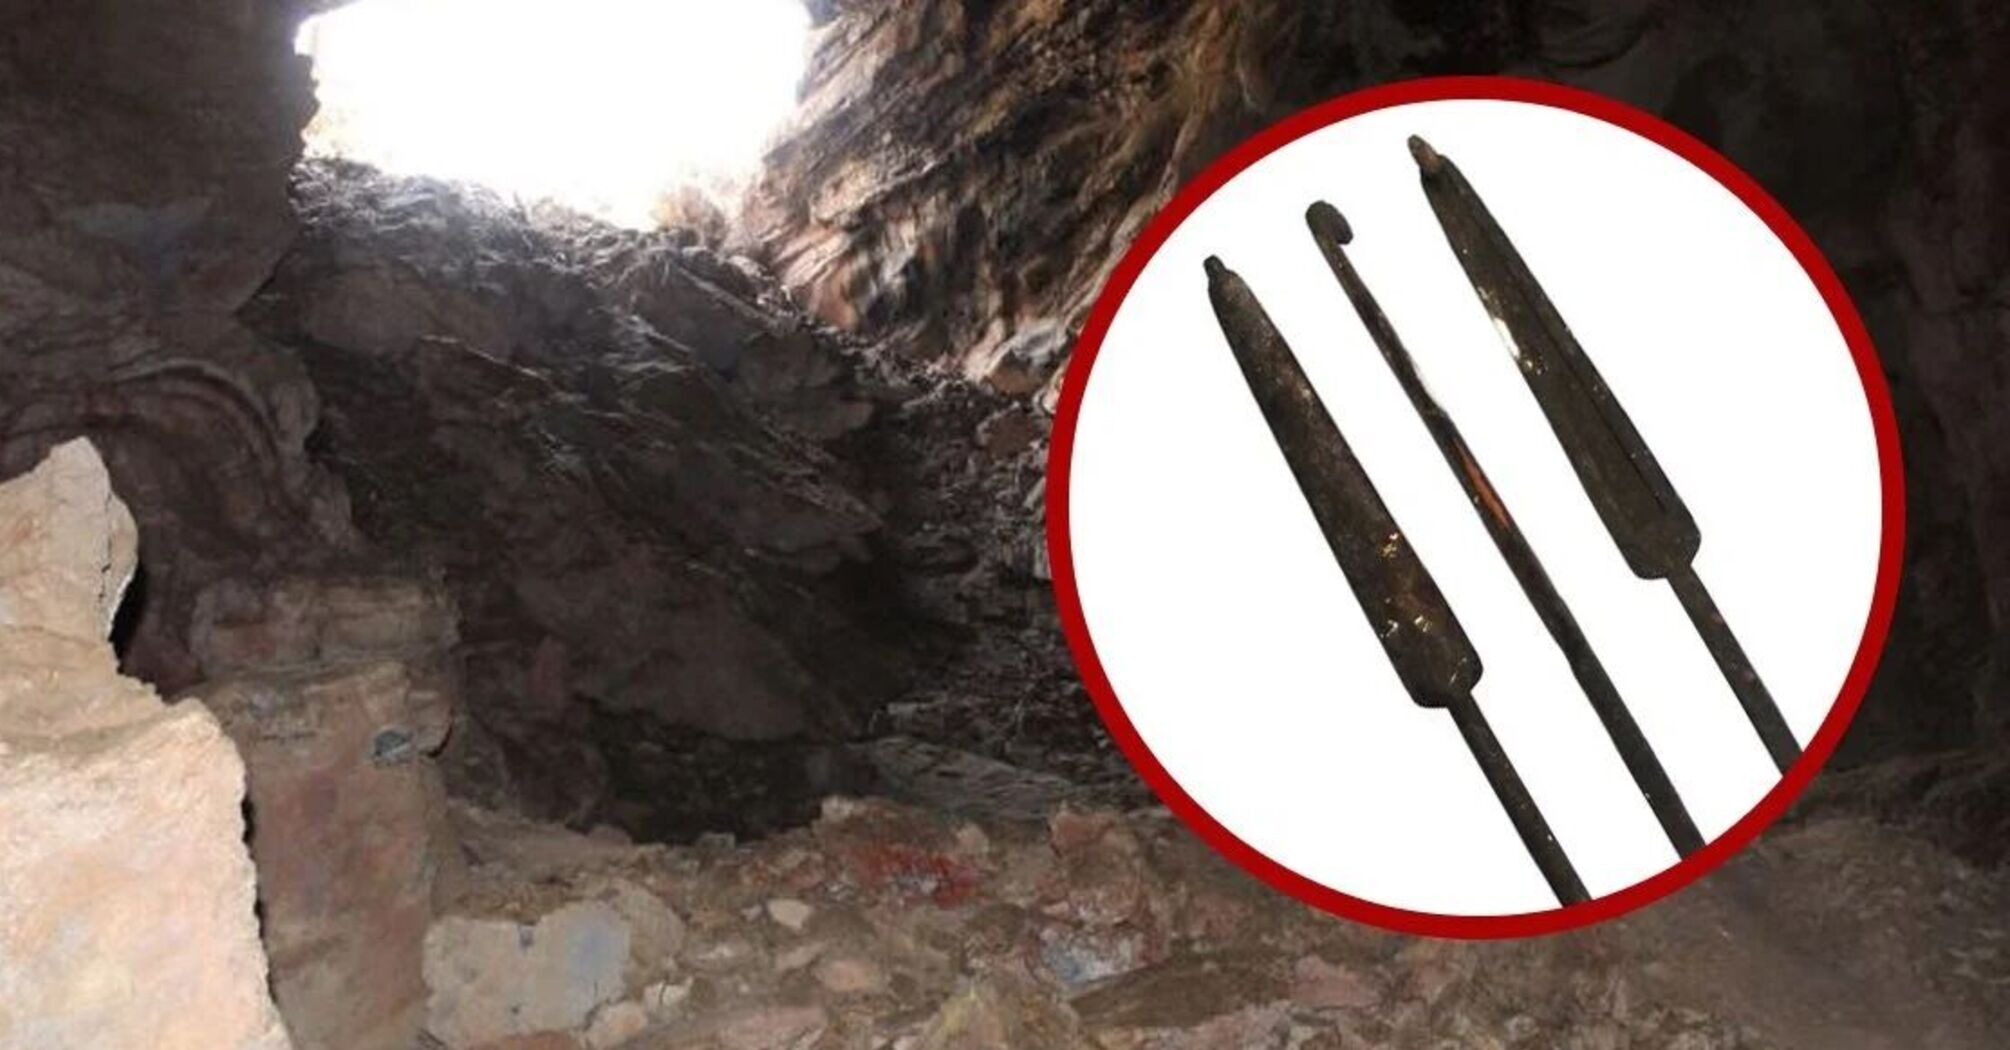 Almost 2000 years old weapon found in a cave in Mexico (photo)